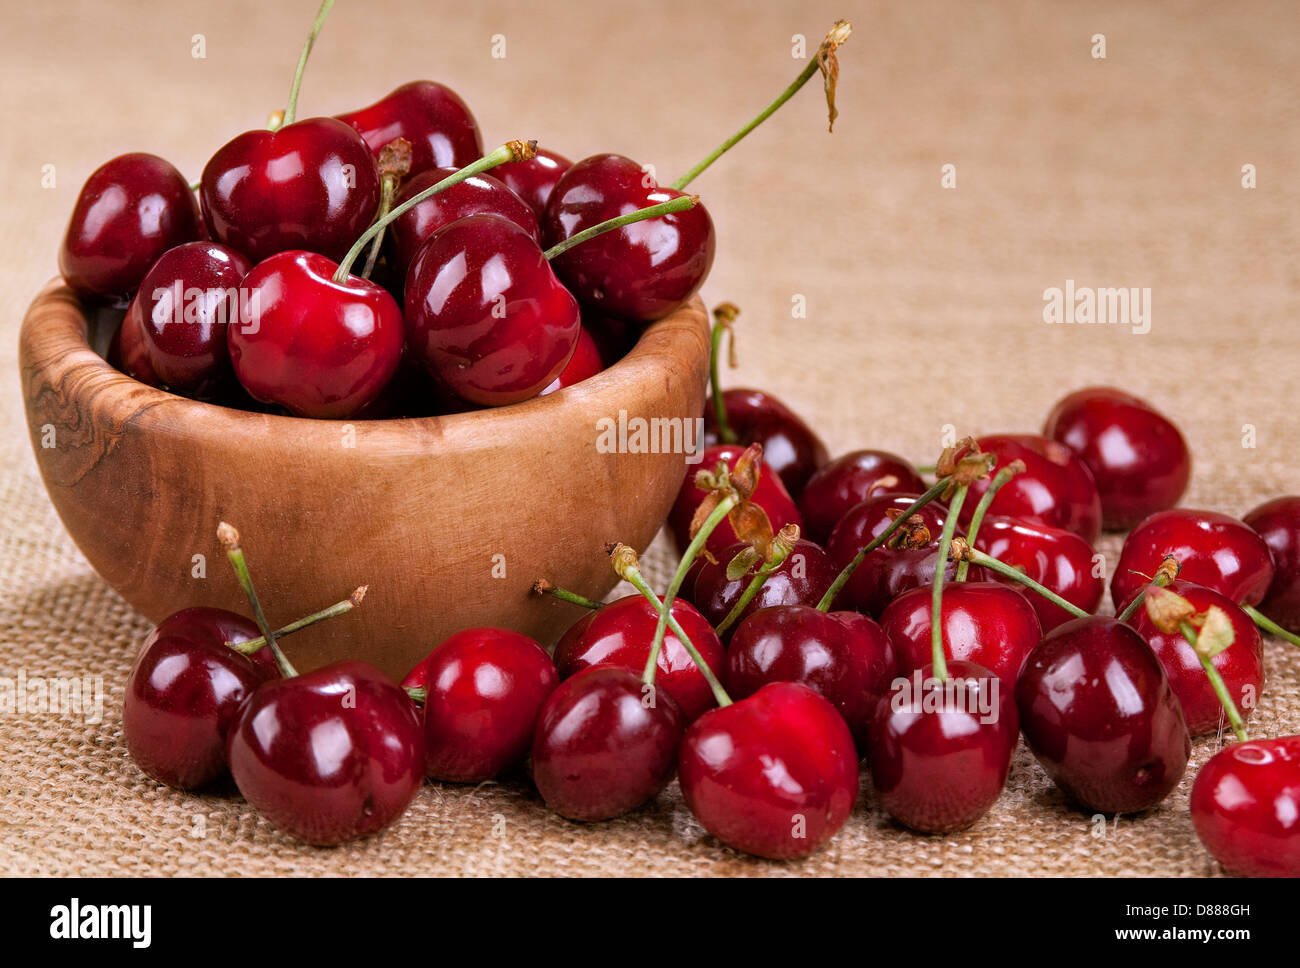 Sour cherries in a wooden bowl Stock Photo